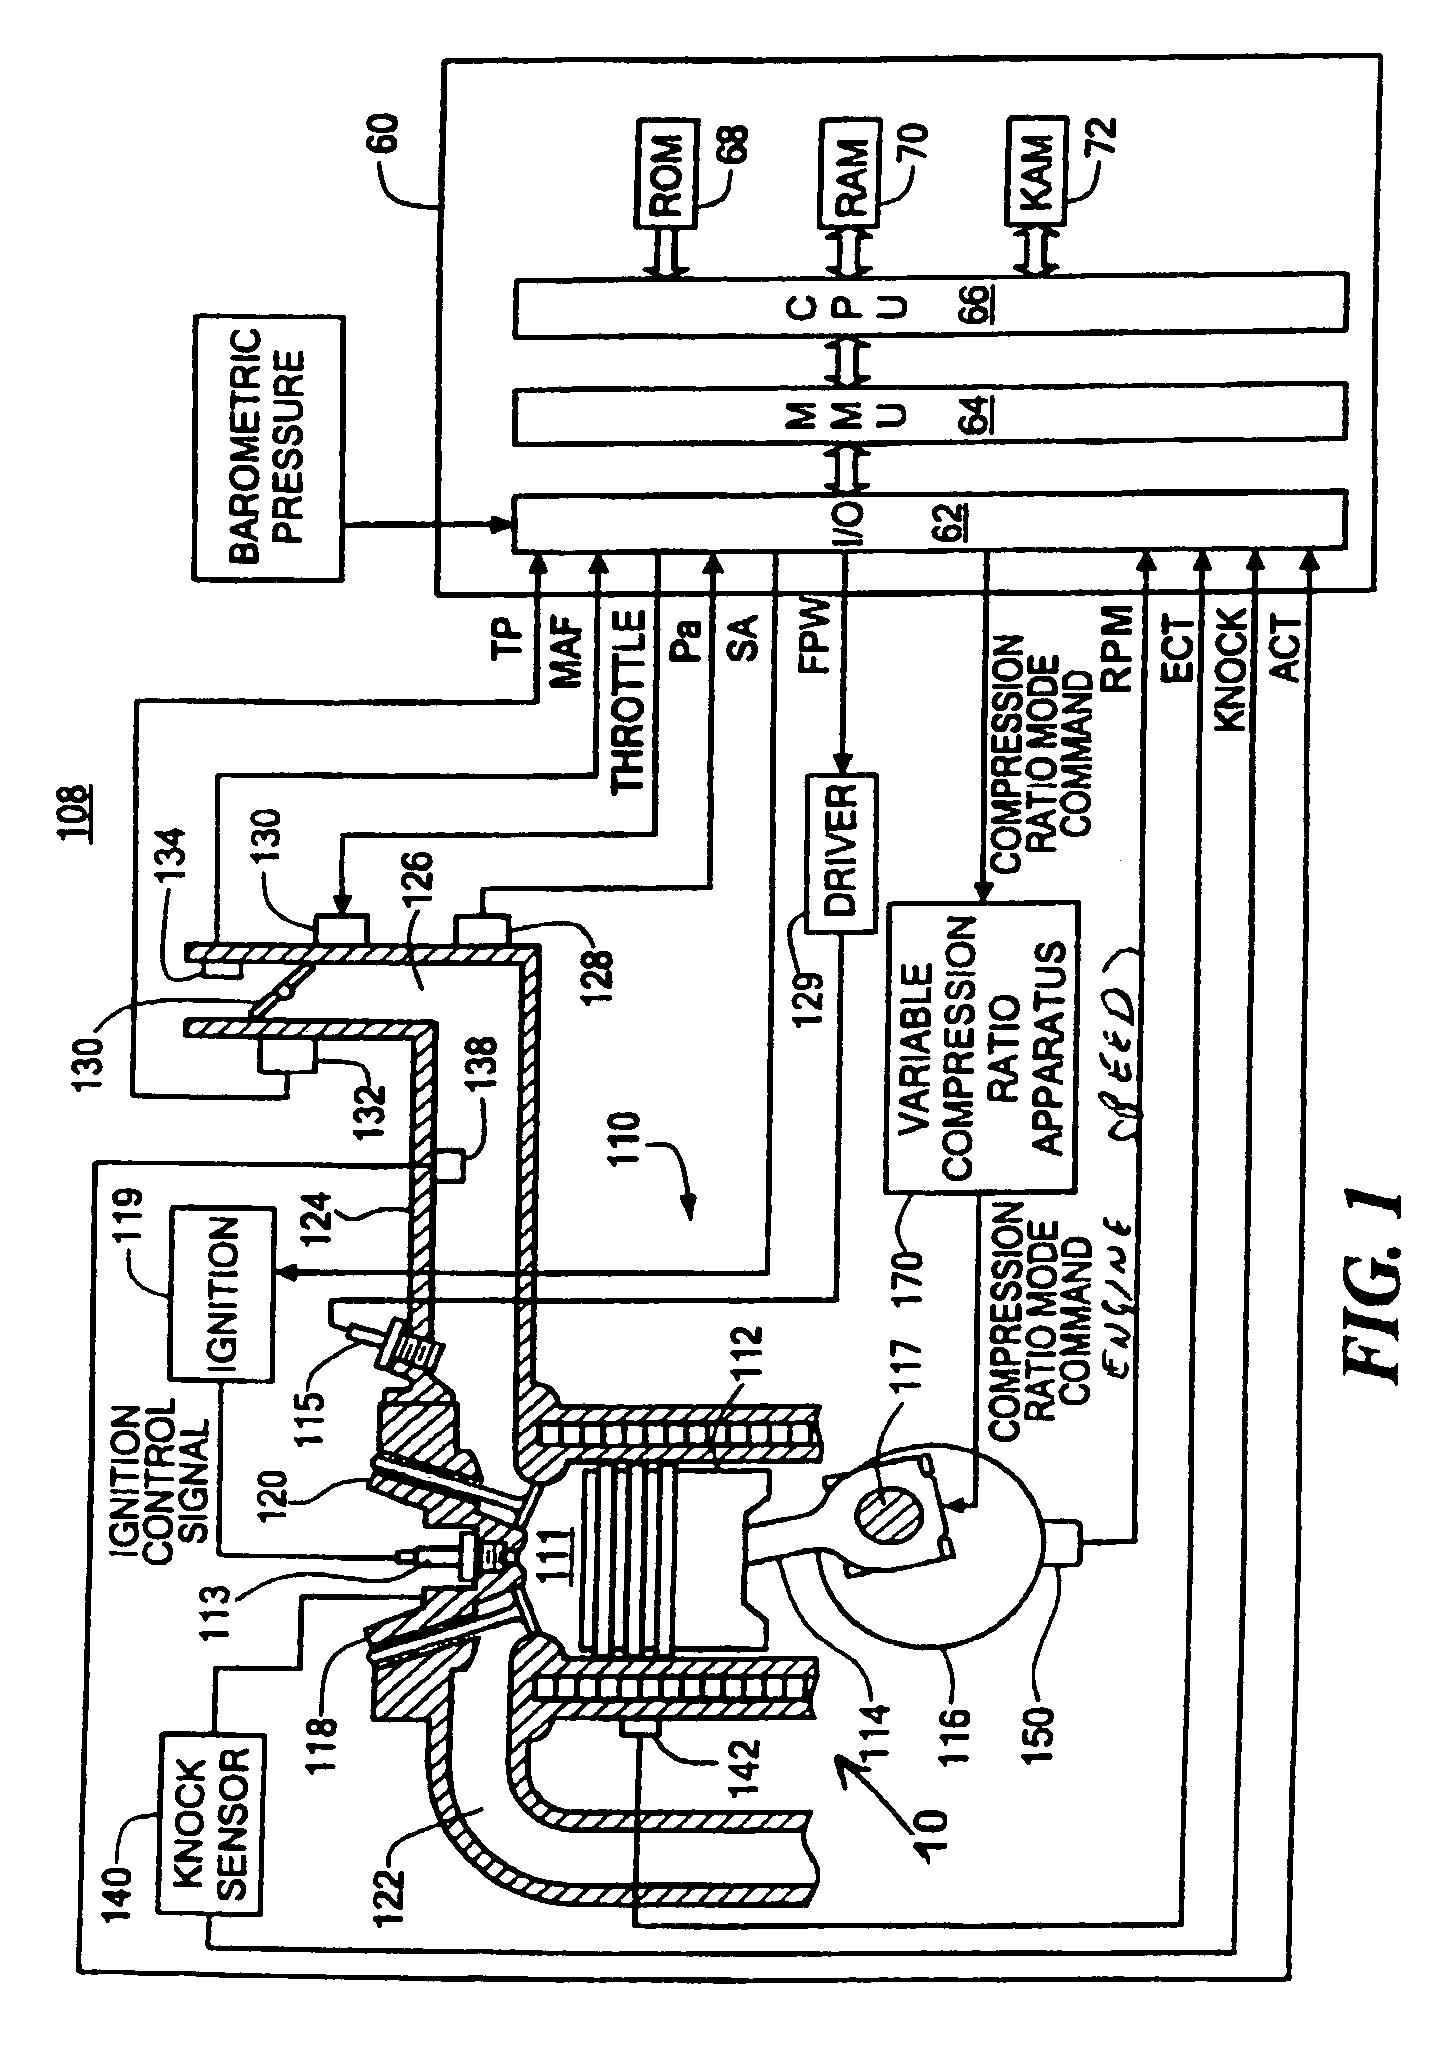 Variable compression ratio scheduling at idle speed conditions